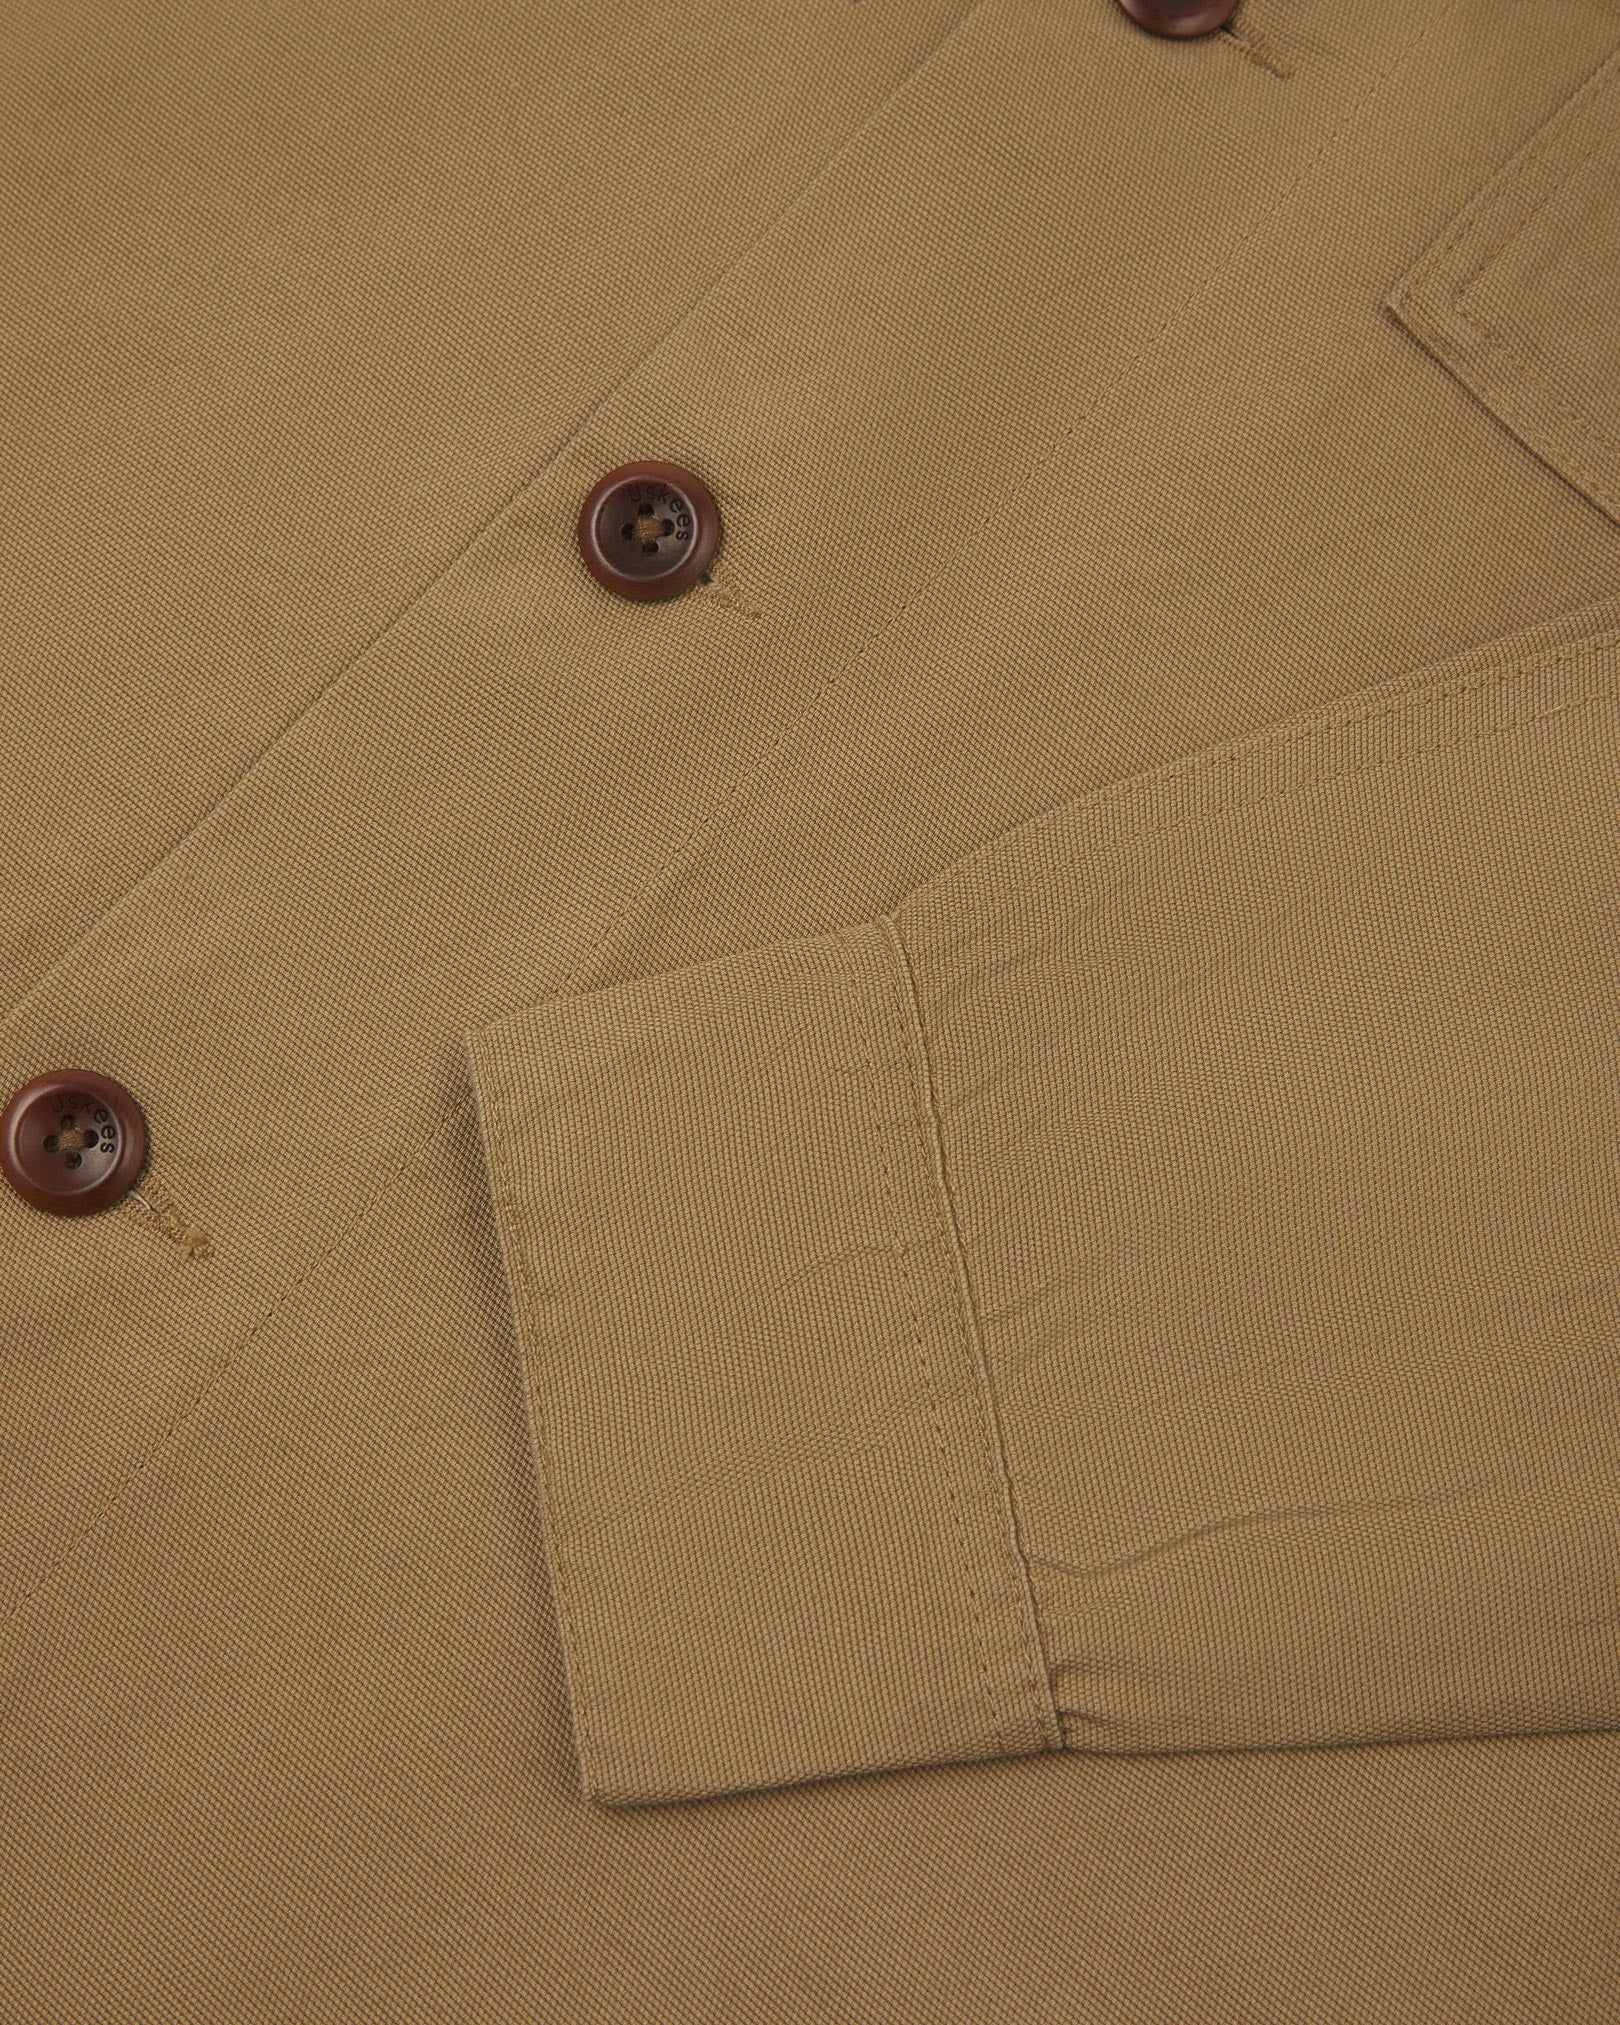 View of the mid-section and sleeve of the 3003 Uskees button-down work shirt in khaki with focus on cuff, placket and corozo buttons.